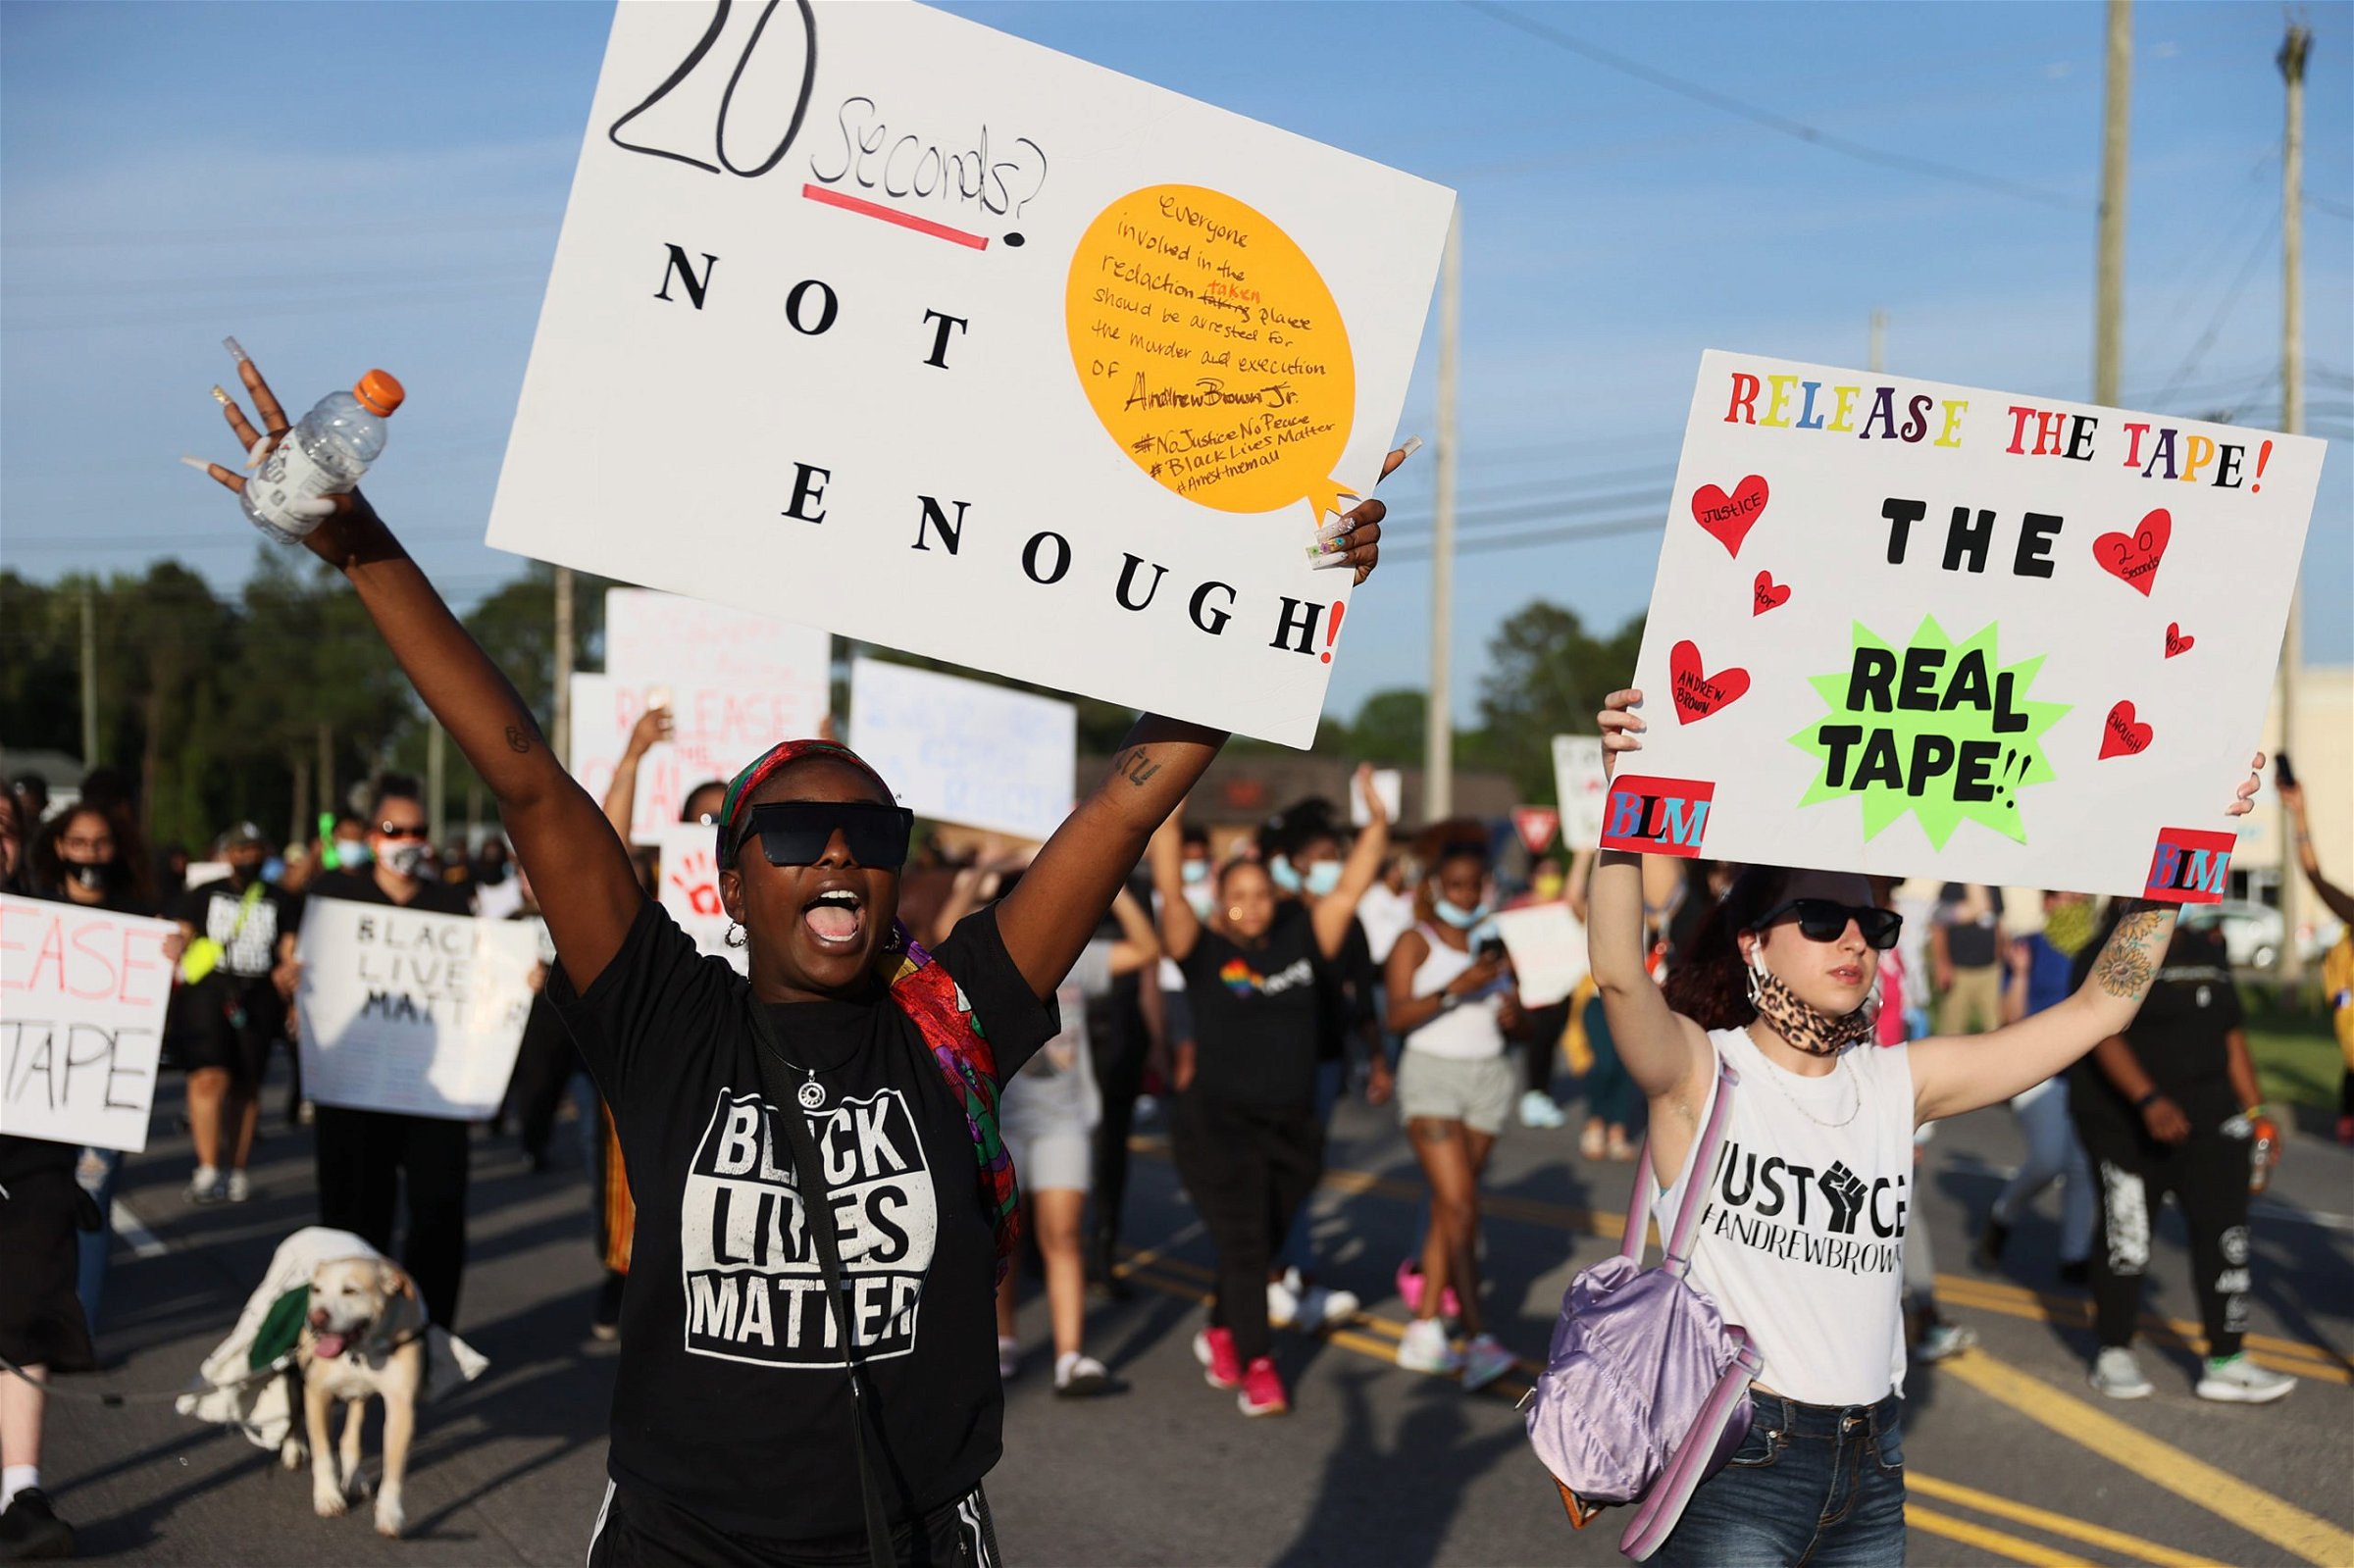 Protesters march through the street calling for justice after the death of Andrew Brown Jr. on April 27, 2021 in Elizabeth City, North Carolina. (Photo by Joe Raedle/Getty Images)